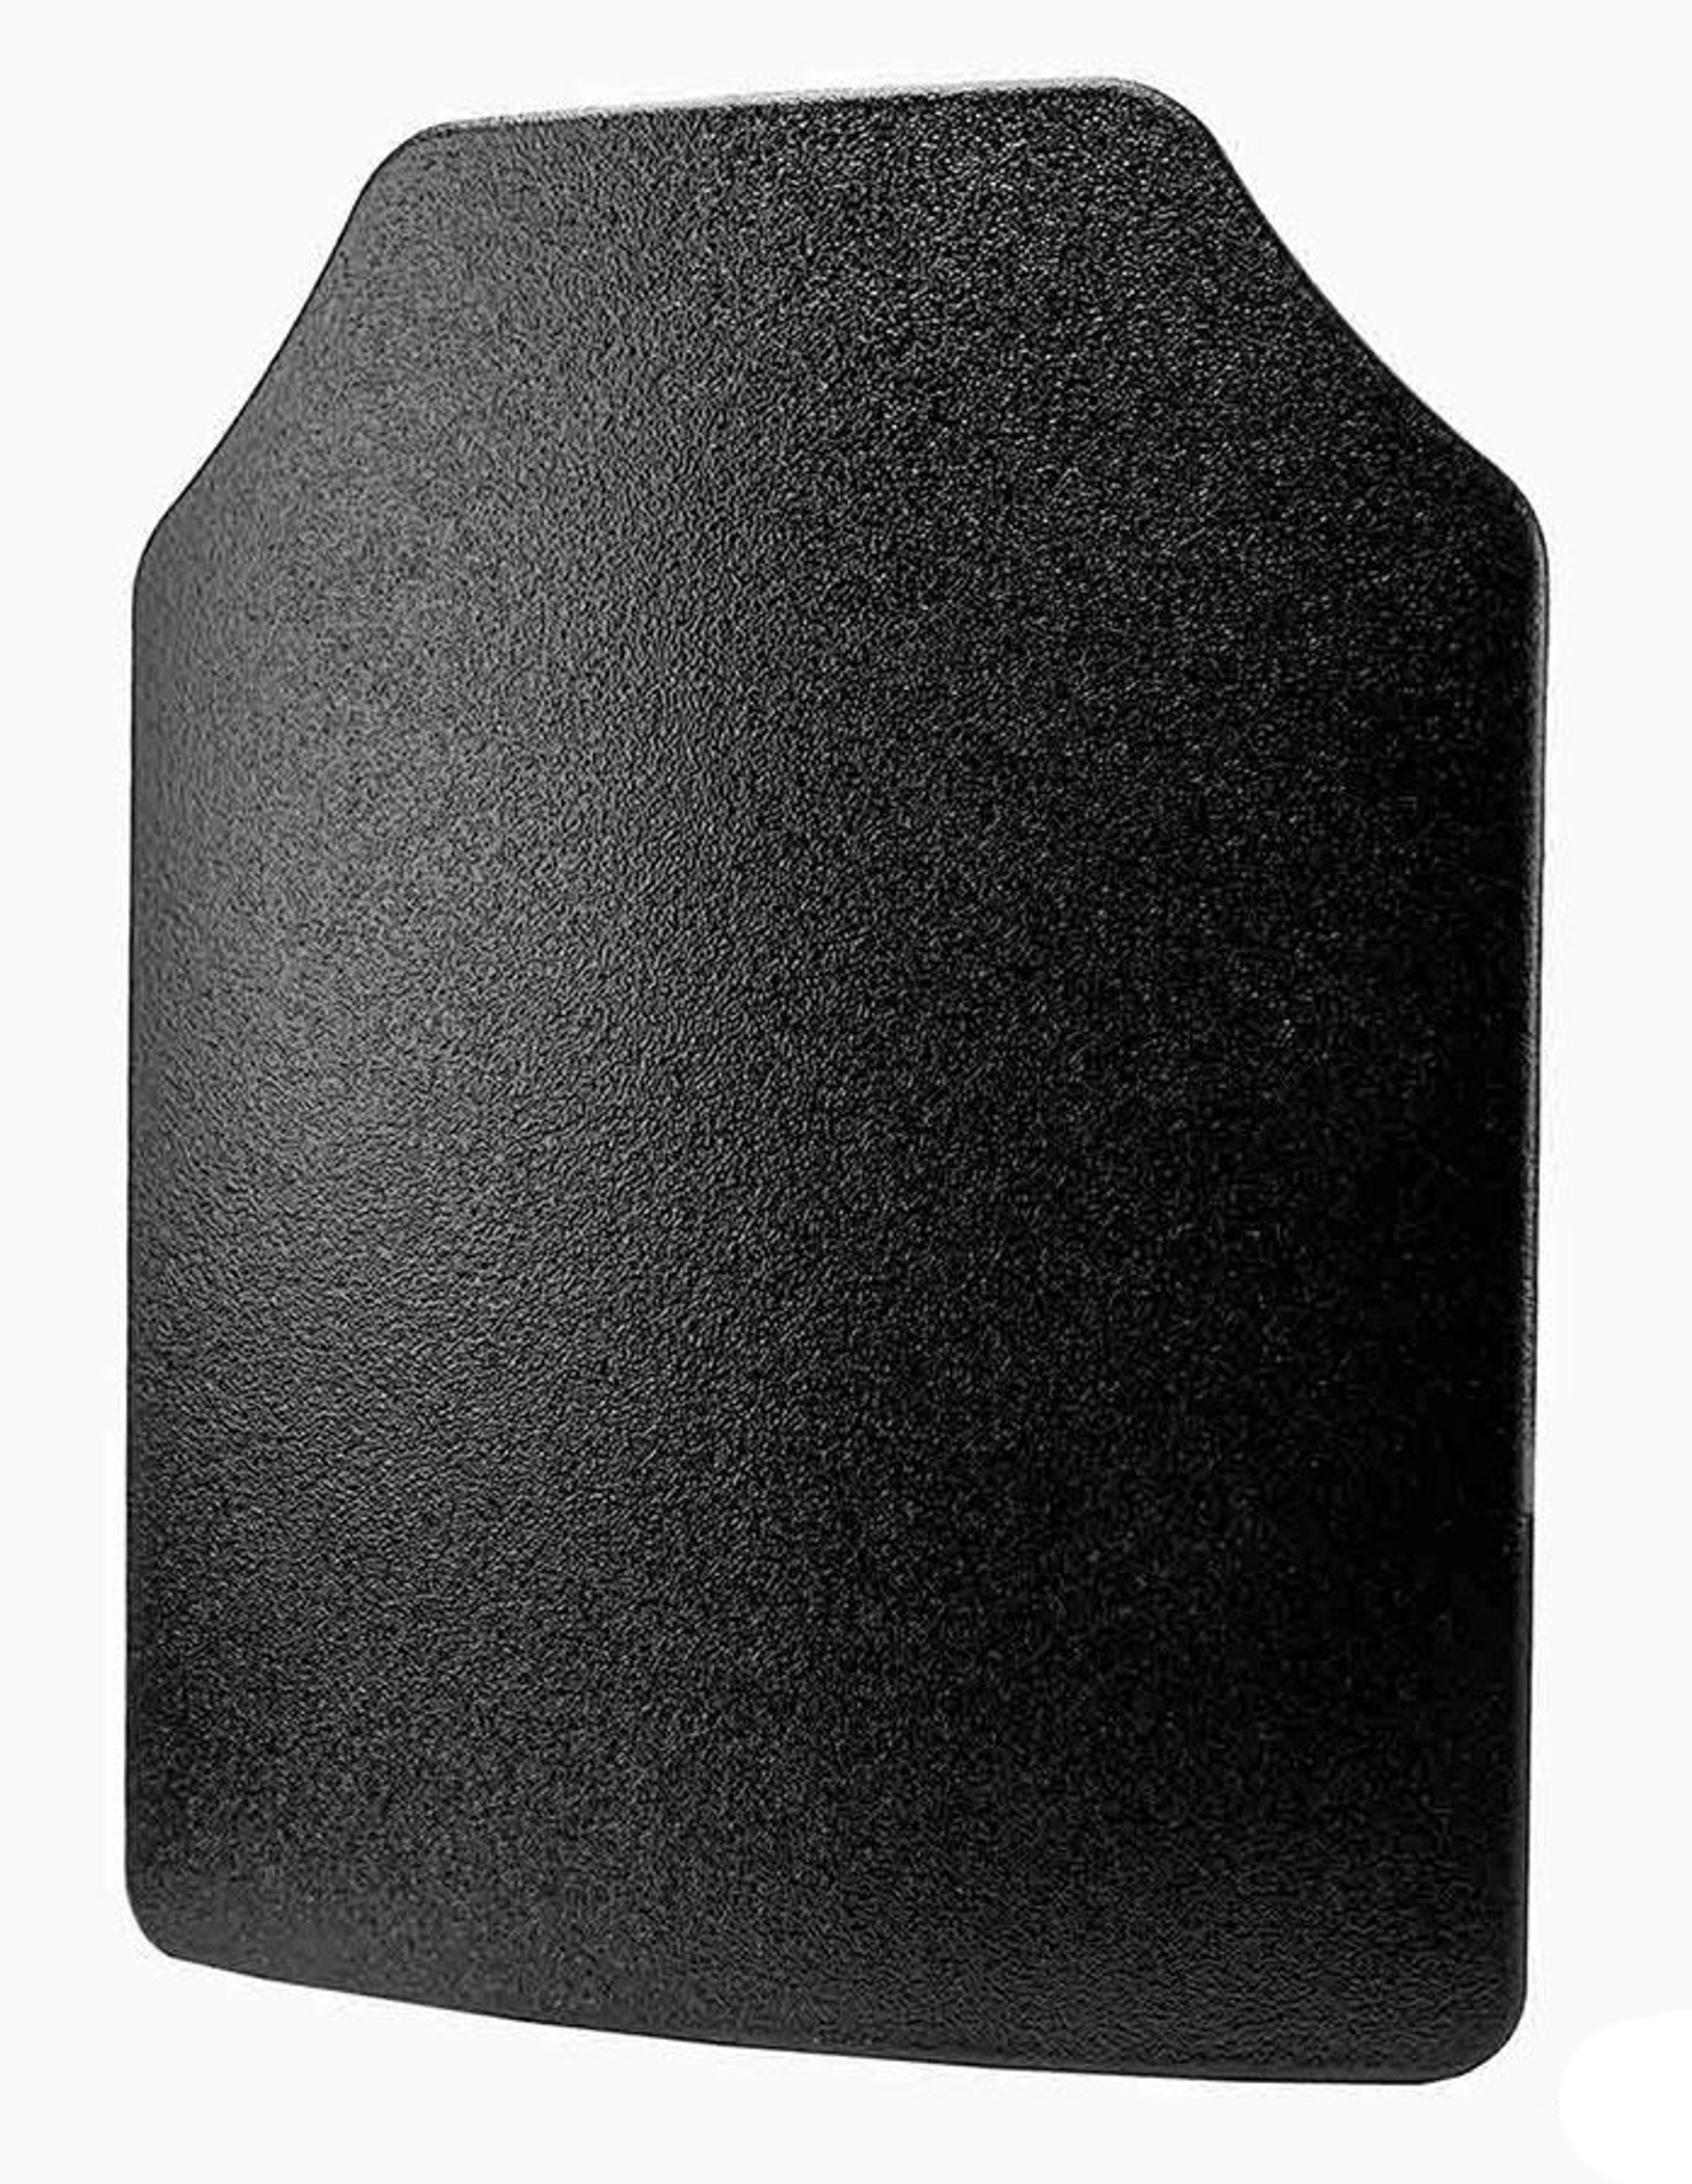 VISM by NcSTAR Level IIIA Pistol Caliber Protection Hard Ballistic Armor Plate (Model: Curved Shooters Cut / 11" x 14")